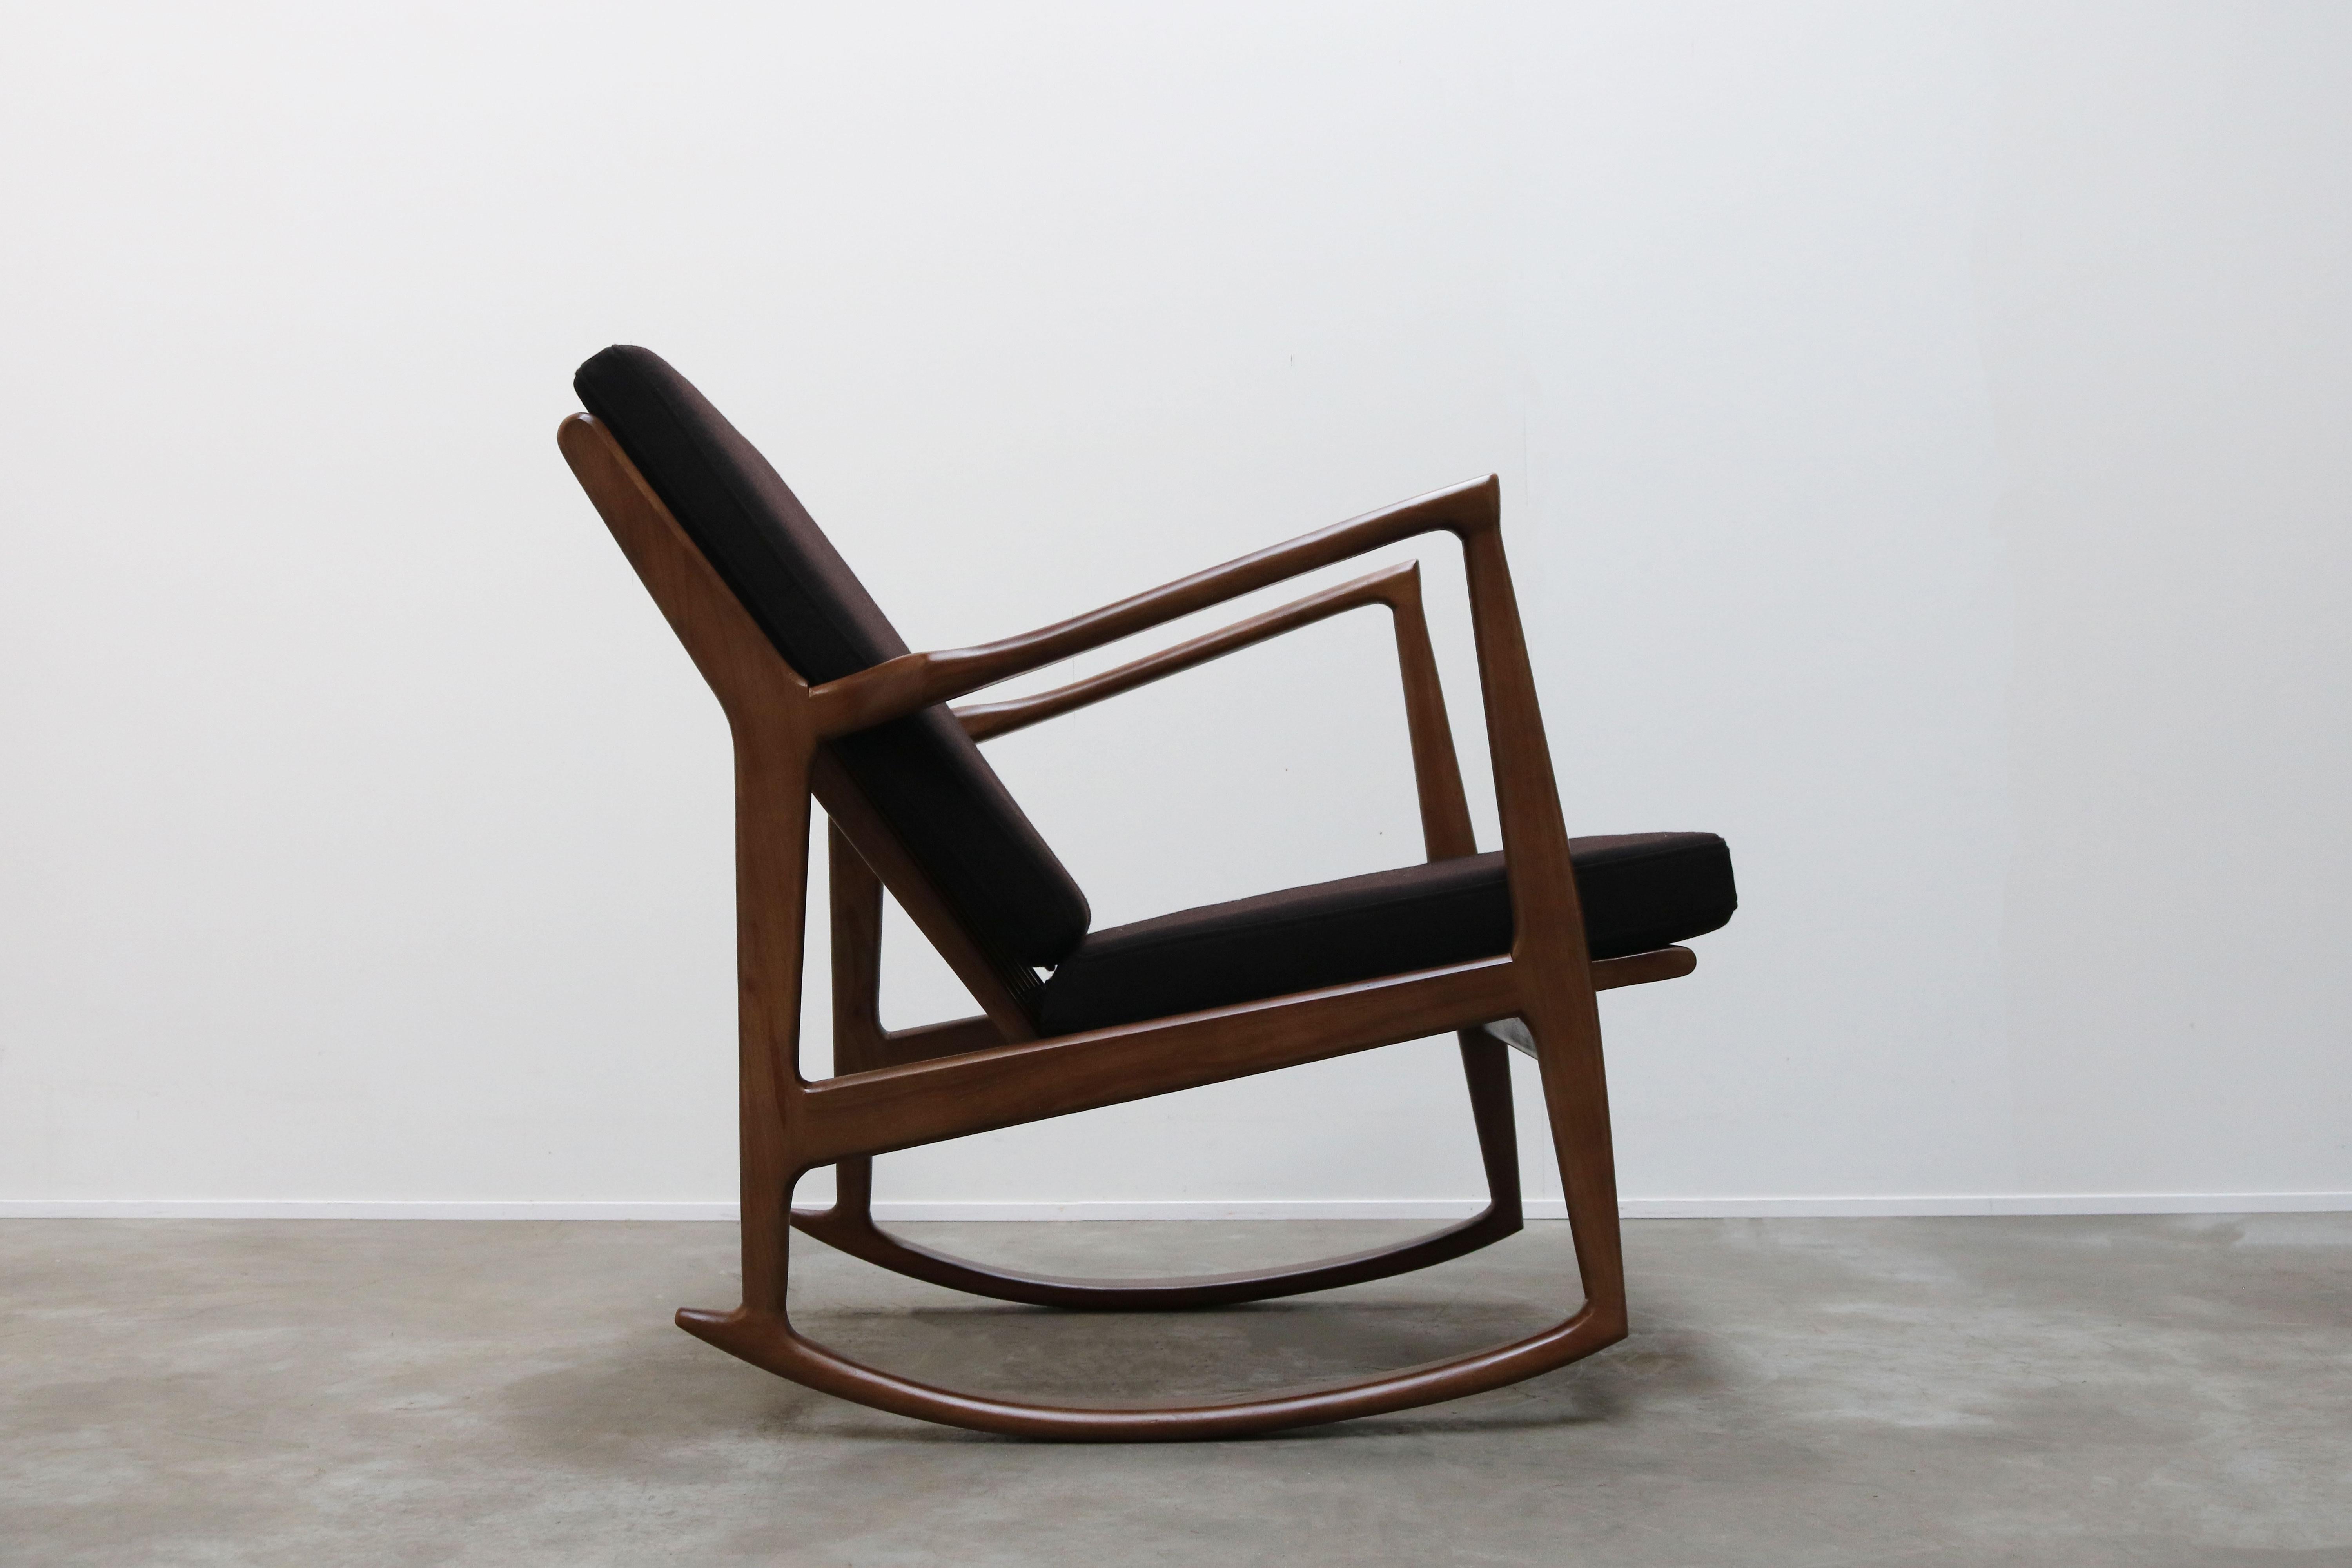 Fabric 1 of 2 Danish Design Style 1950 New Modern Rocking Chair Walnut Brown Cashmere For Sale